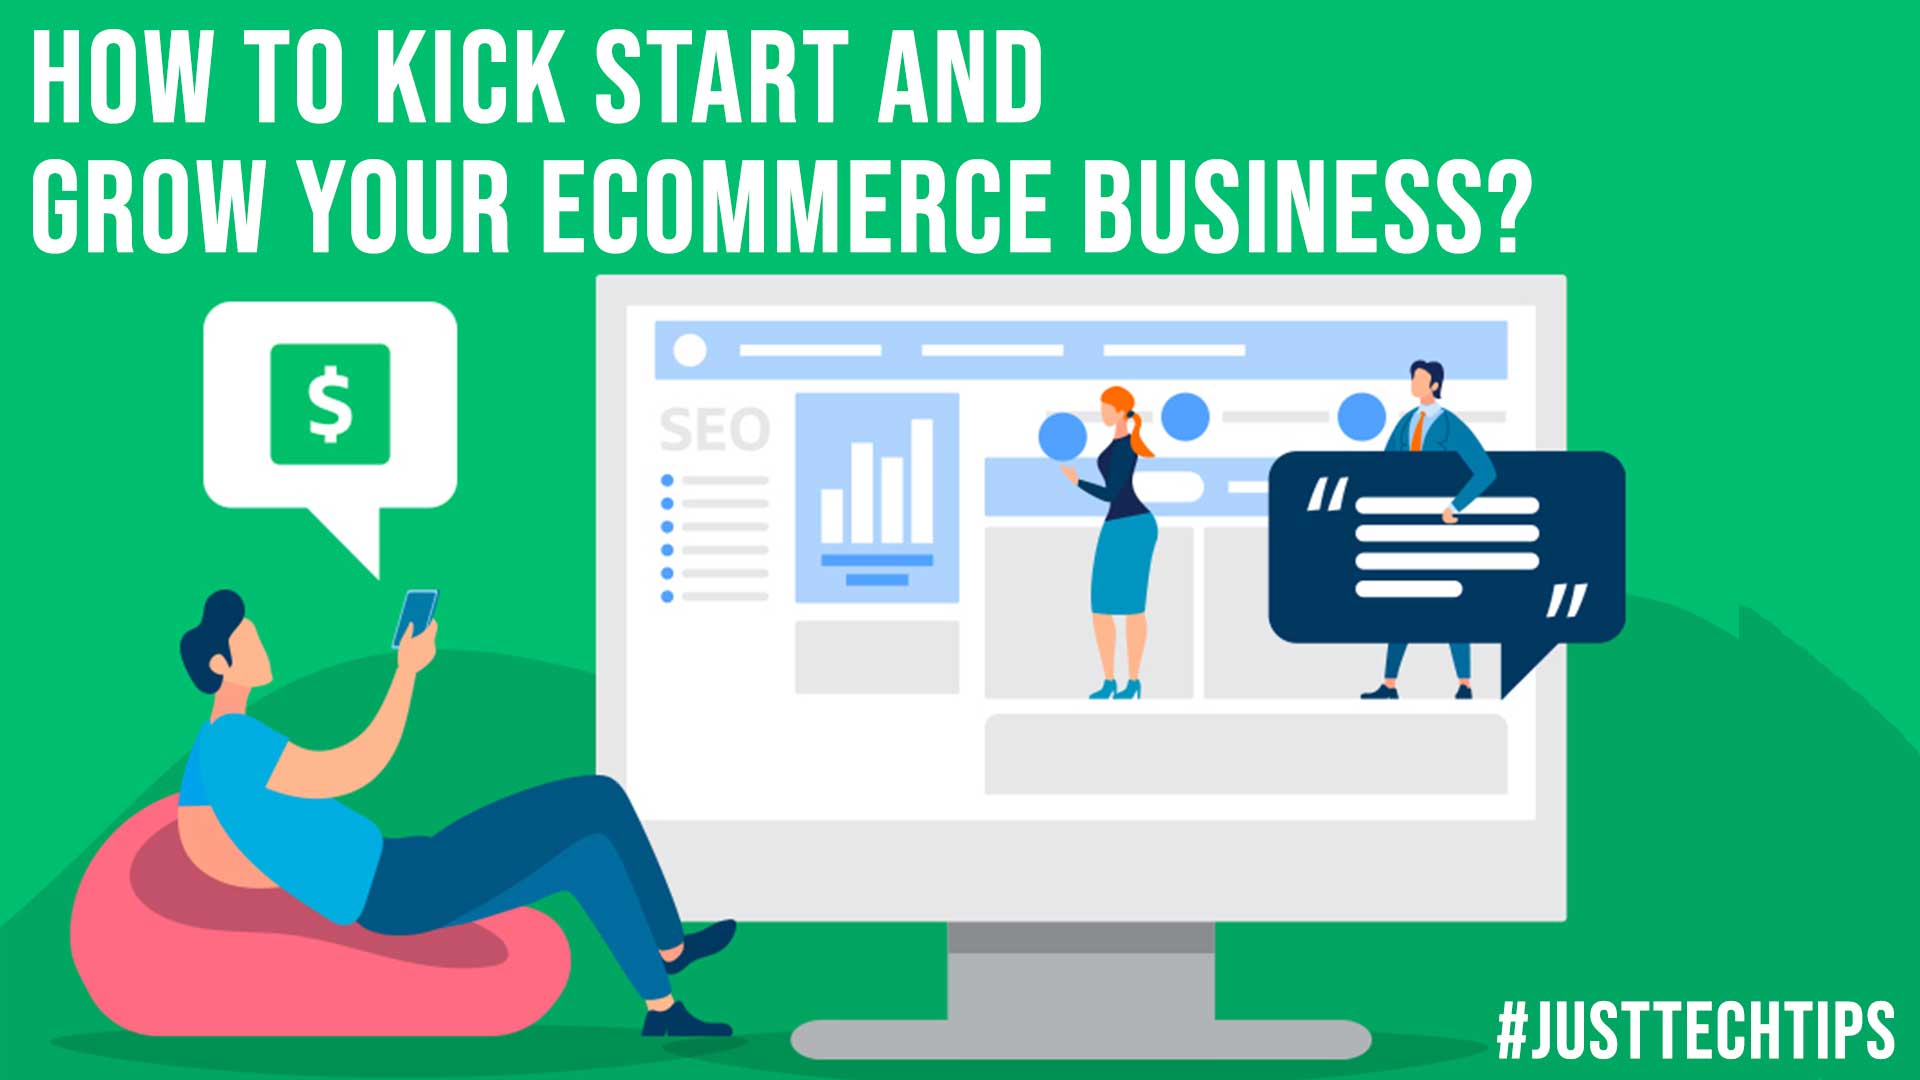 How To Kick Start and Grow your eCommerce Business